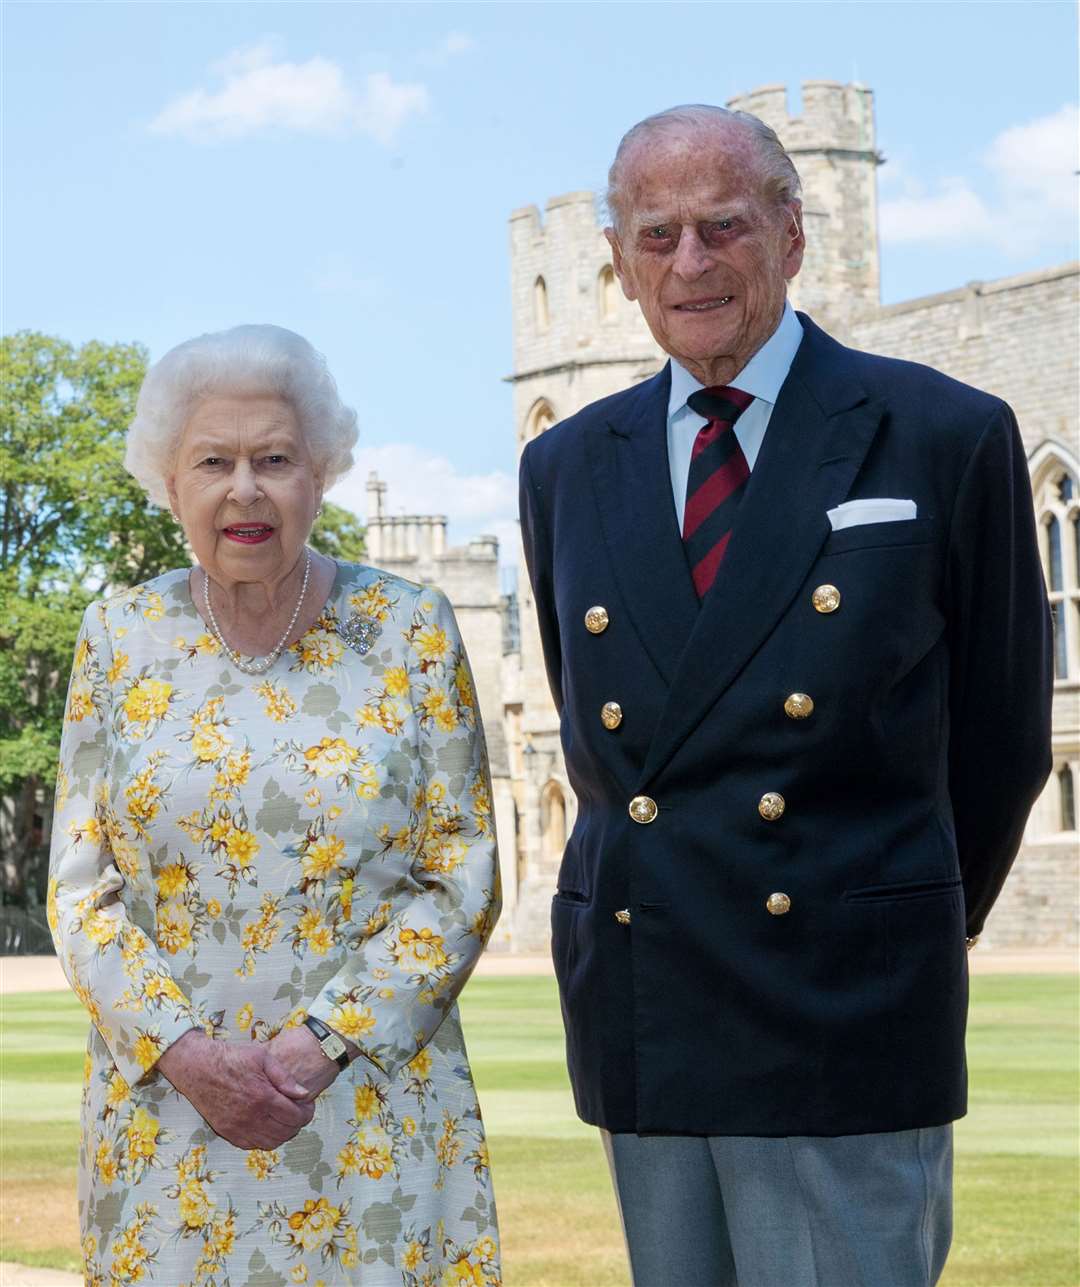 The Queen and the Duke of Edinburgh in a photo released to mark Philip turning 99 (Steve Parsons/PA)